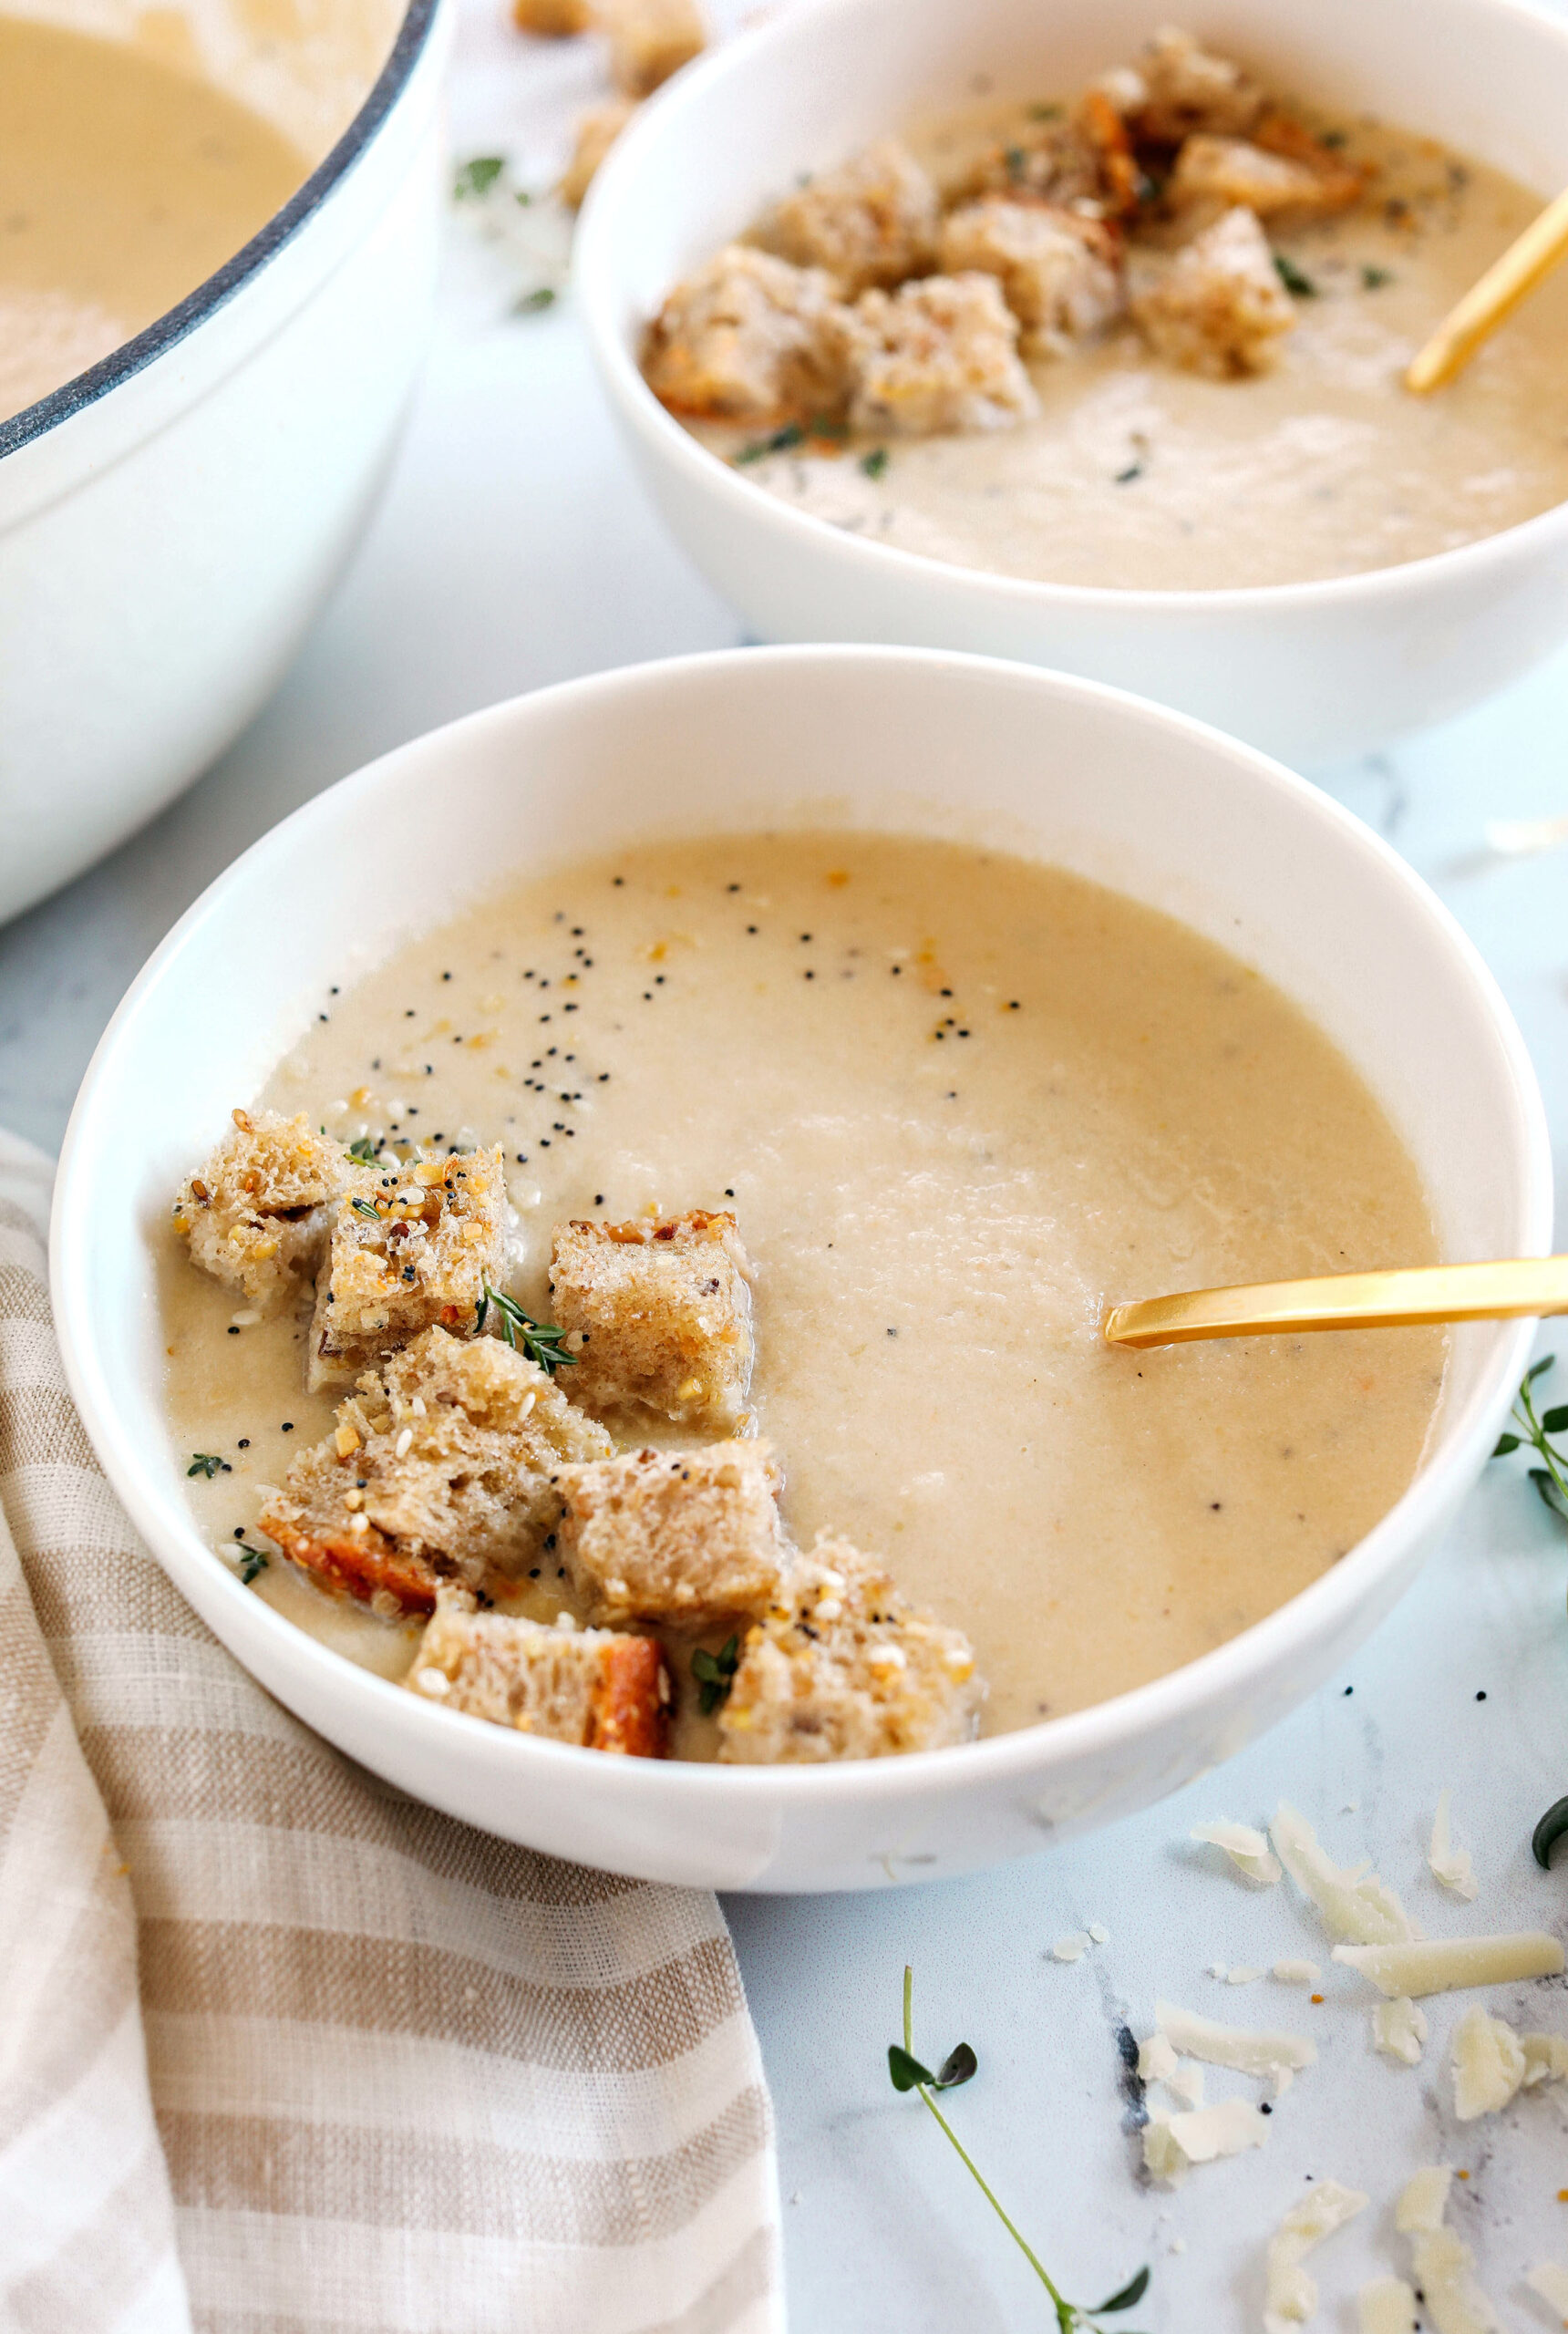 Creamy Cauliflower Soup topped with homemade seasoned croutons that is delicious, loaded with fresh vegetables, and makes the perfect cozy comfort meal that can easily be made in just 30 minutes!